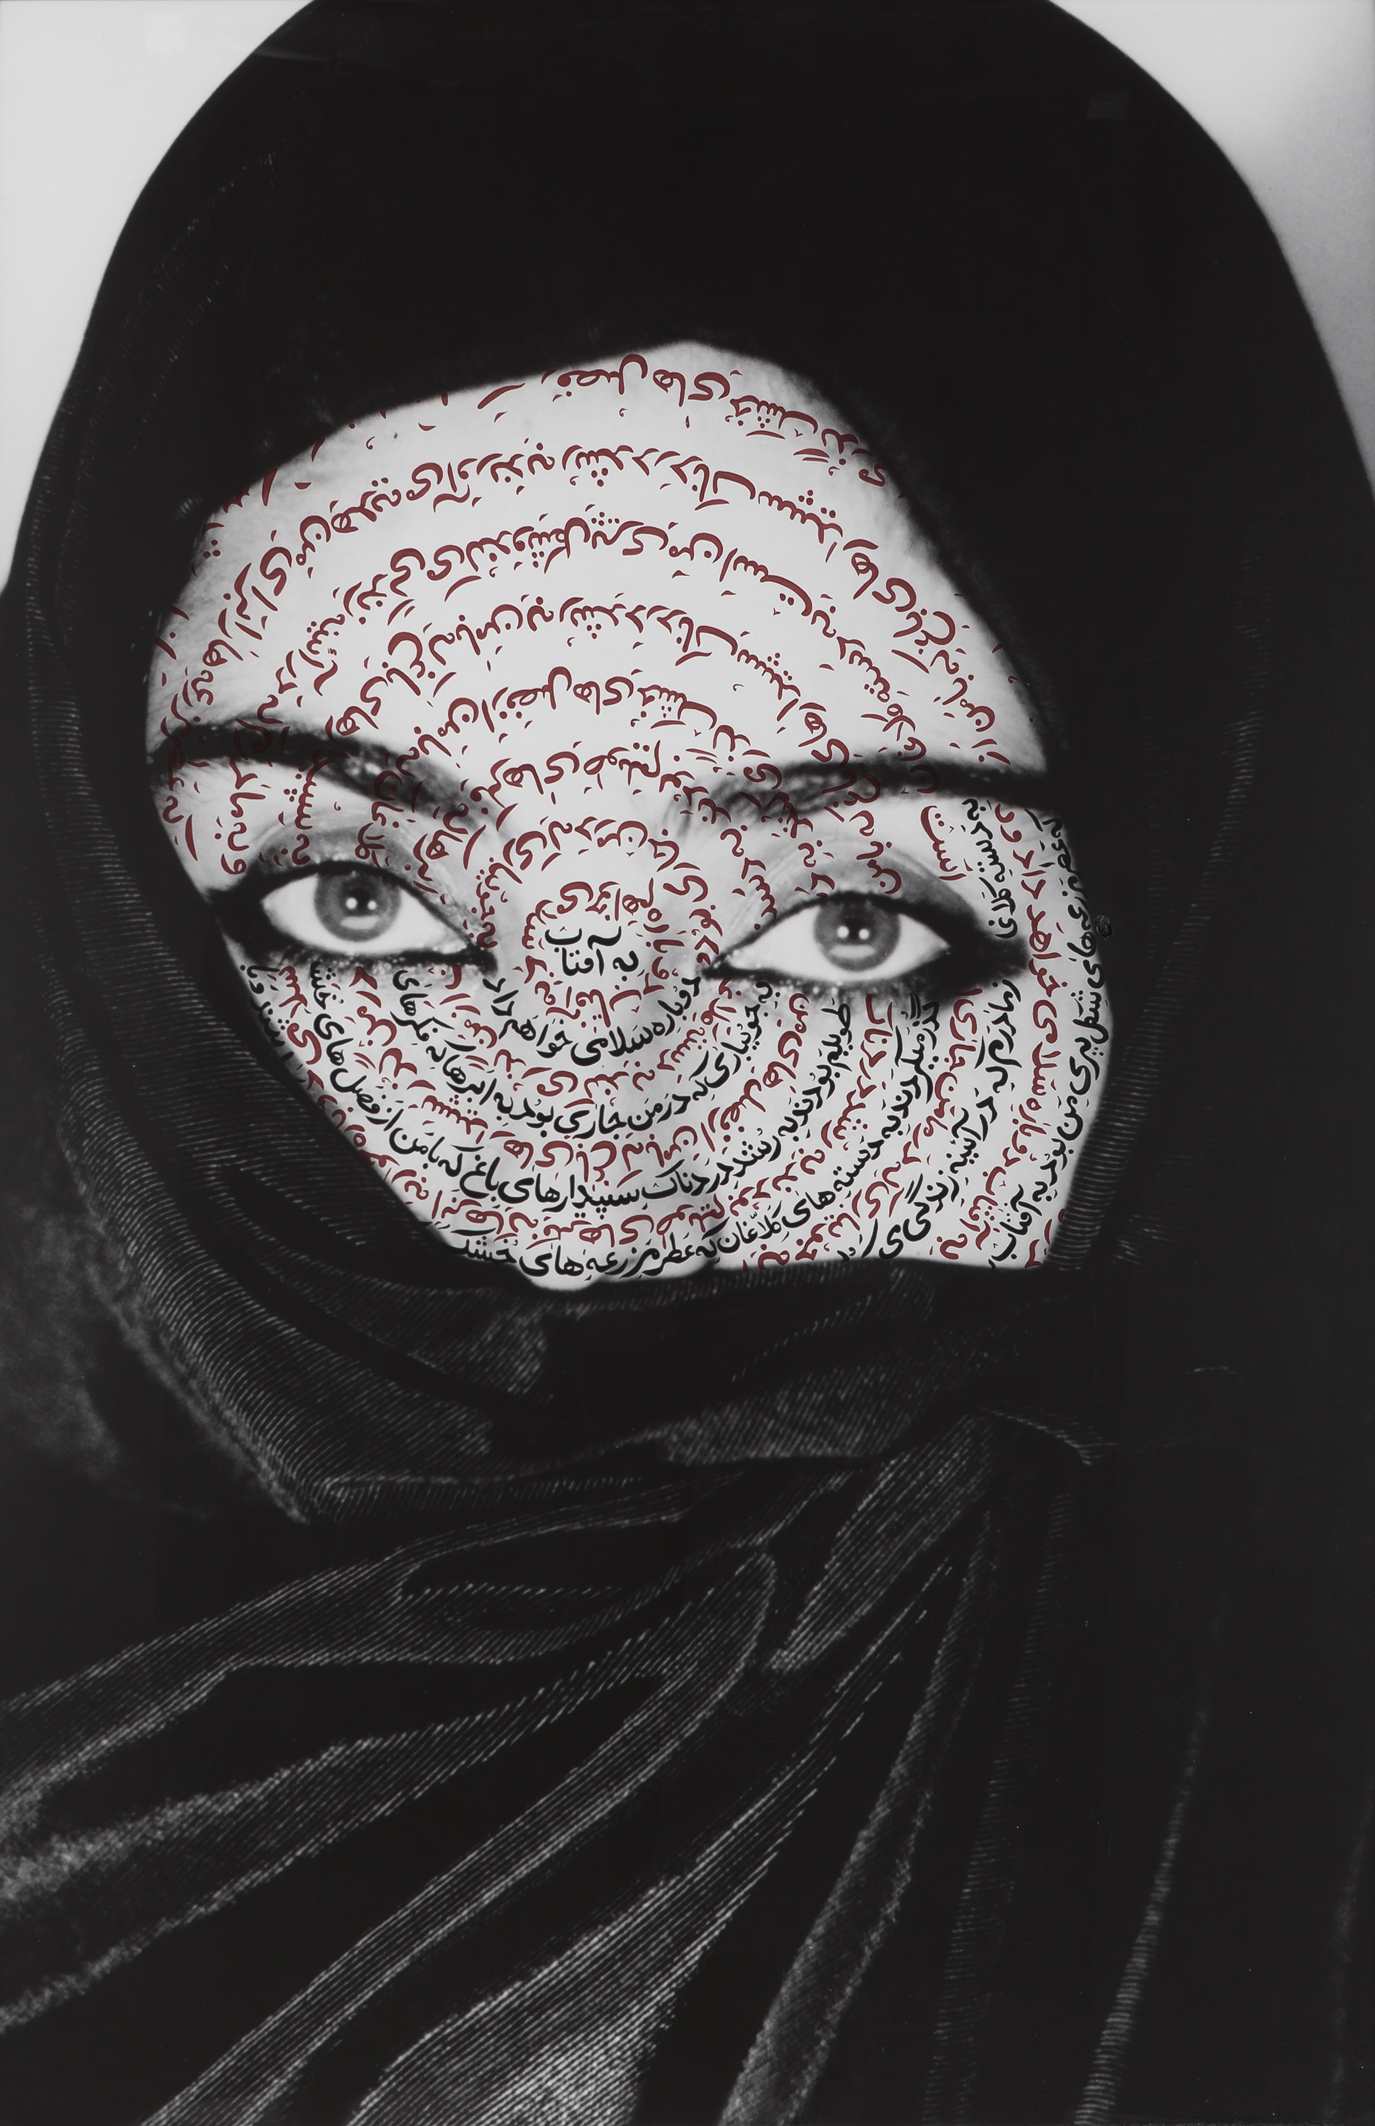 A photo by Shirin Neshat. It is a close up of a woman wearing a black headscarf. Her eyes are looking straight into the camera, and her face is covered in Arabic calligraphy.